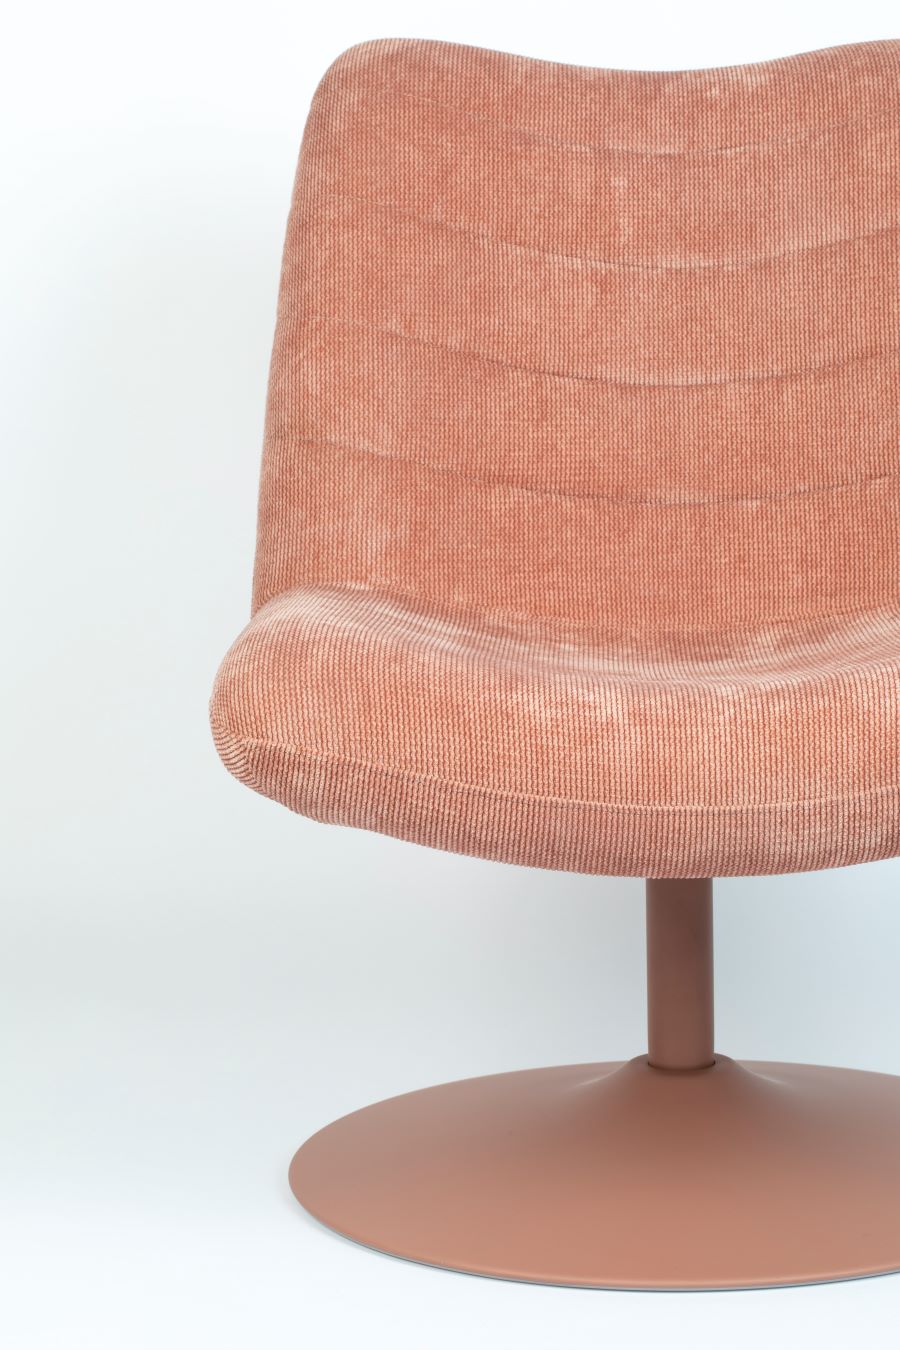 Louge Chair pink